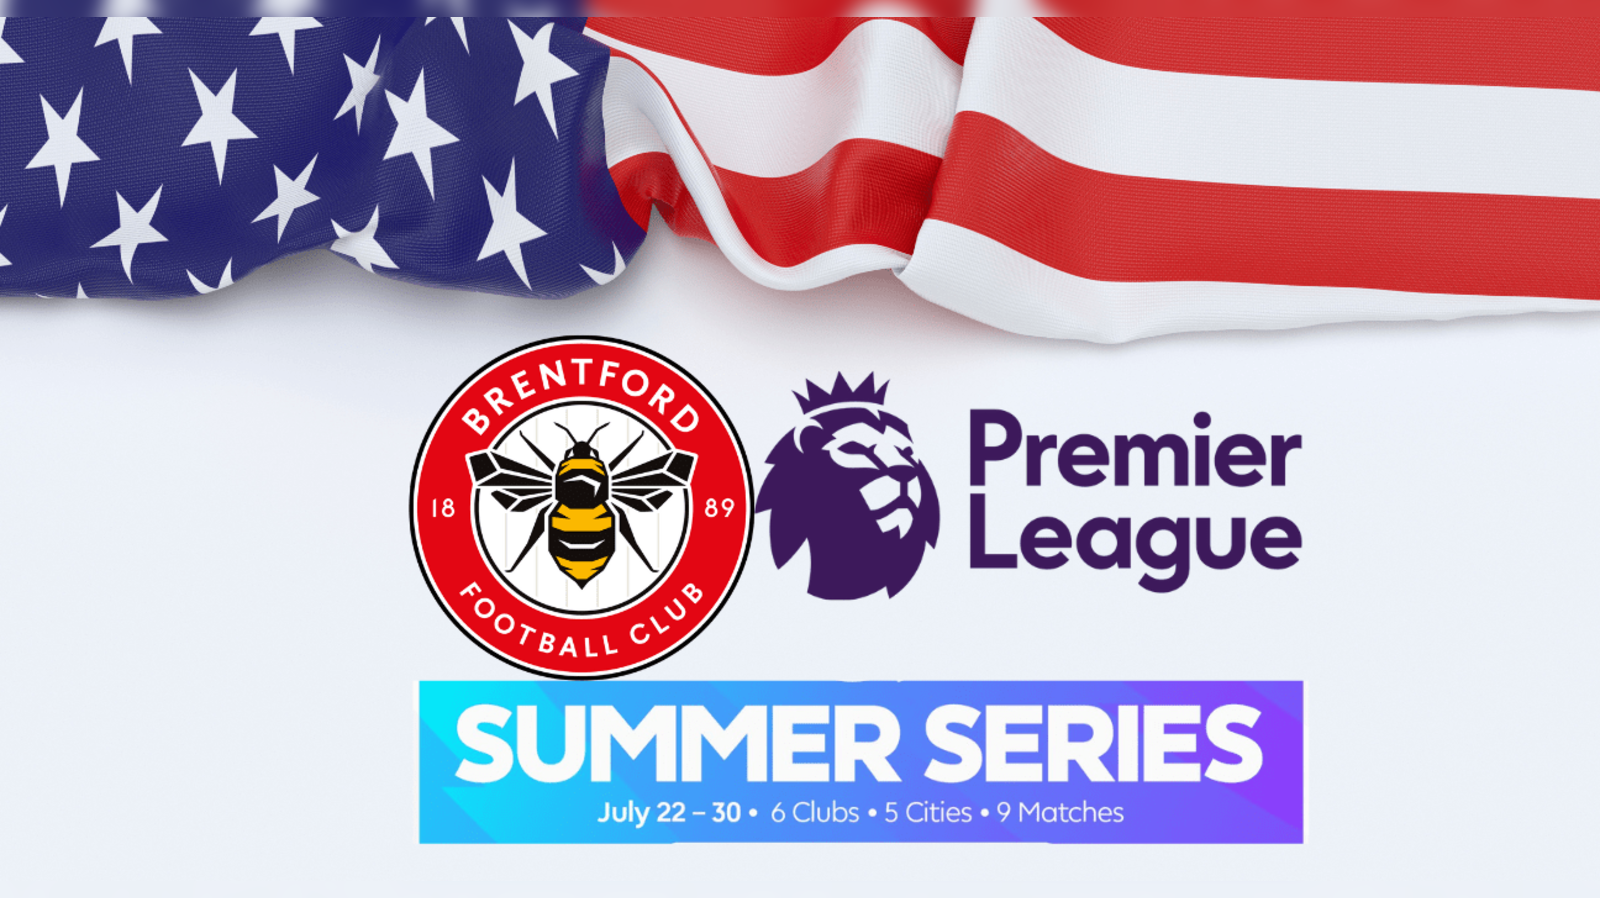 Watch all Premier League games live on Prime Video for FREE